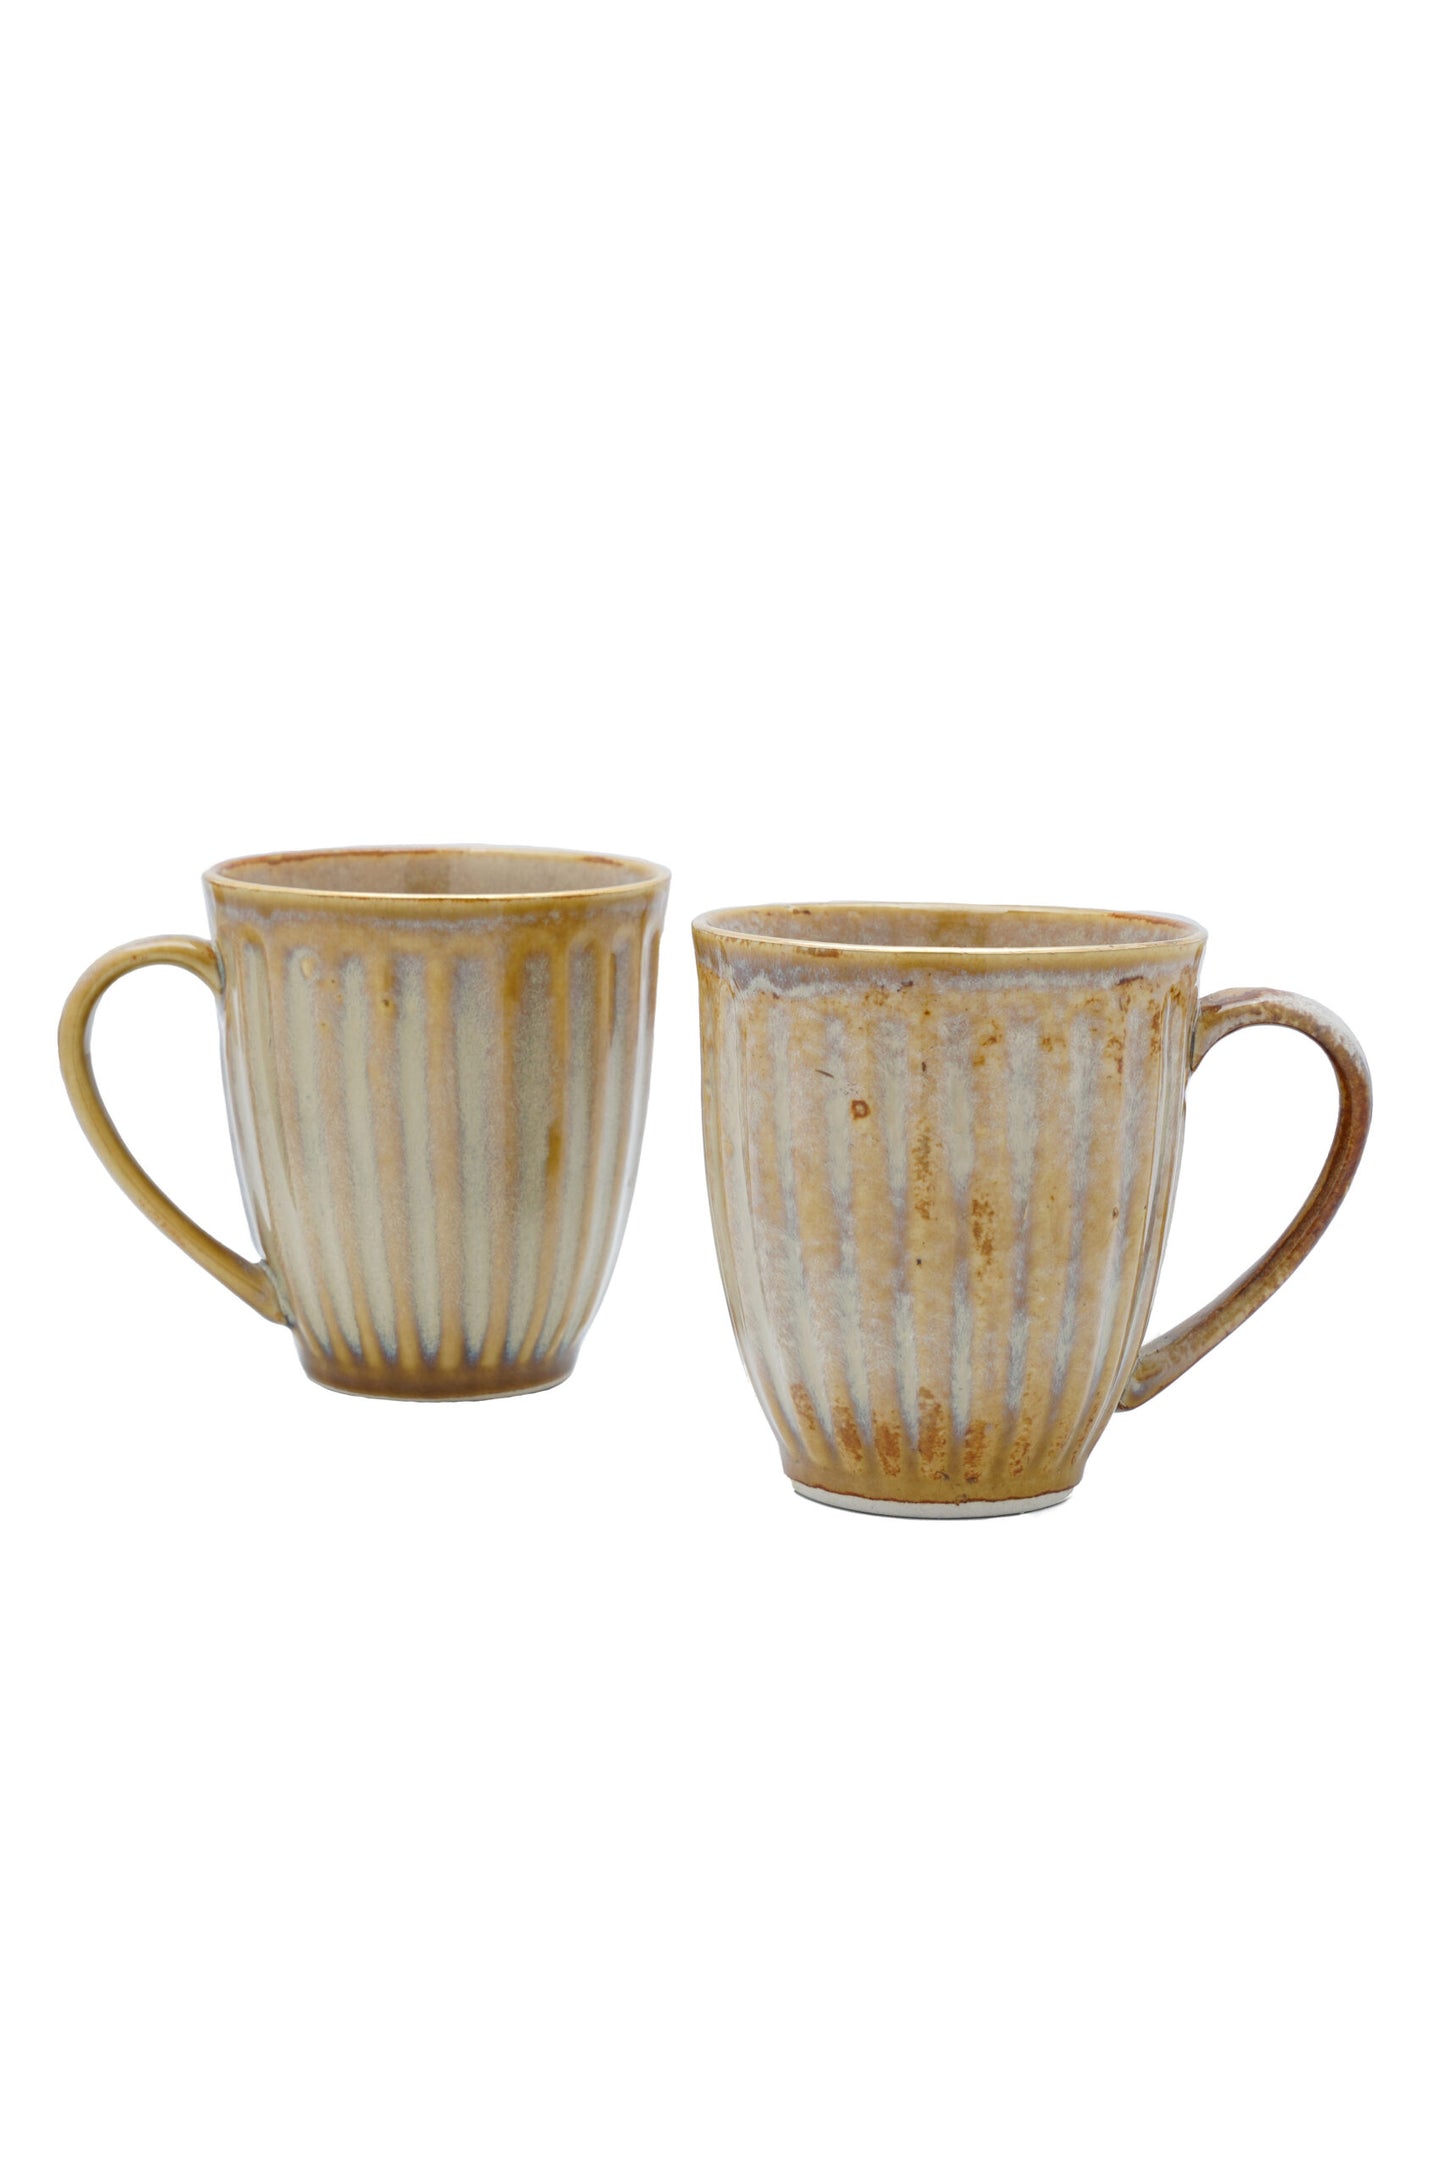 Folkstorys - Golden Rod Mugs with Gold Minimal Coasters Set of 2